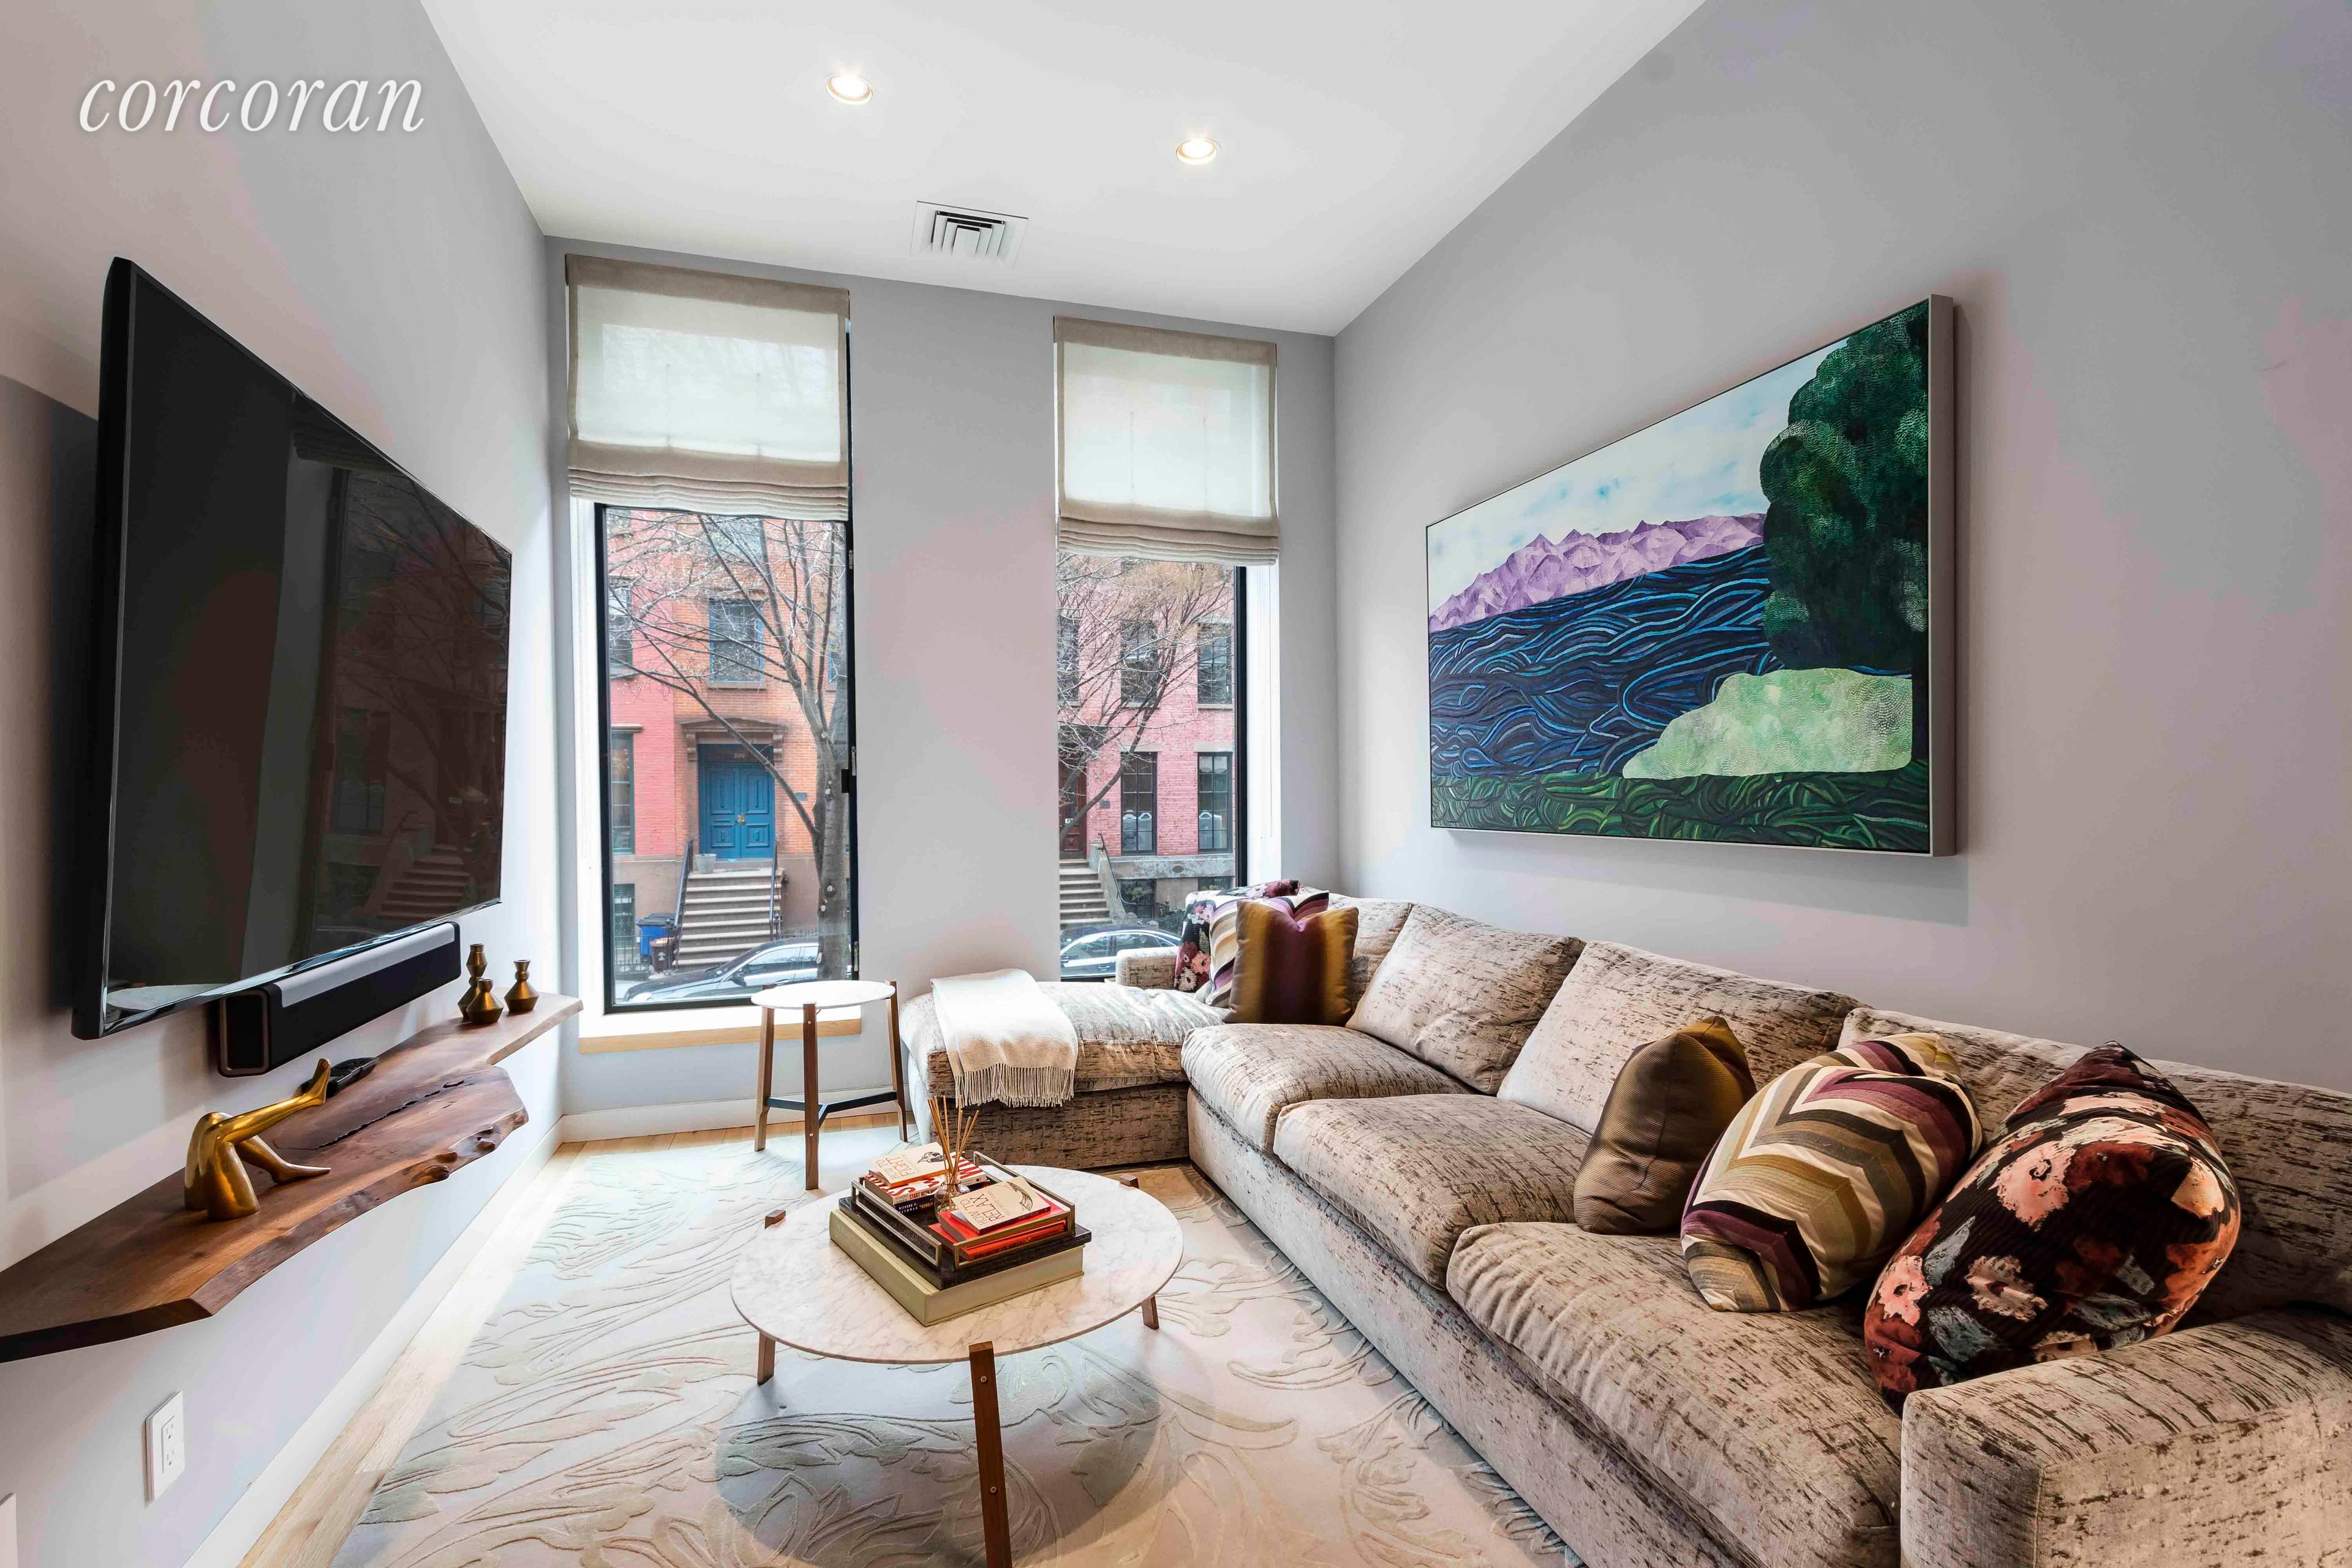 269 State Street is a remarkable five story, modern, bright townhouse at the crossroads of Brooklyn Heights and Boerum Hill with five bedrooms, four bathrooms, a media room, play room ...